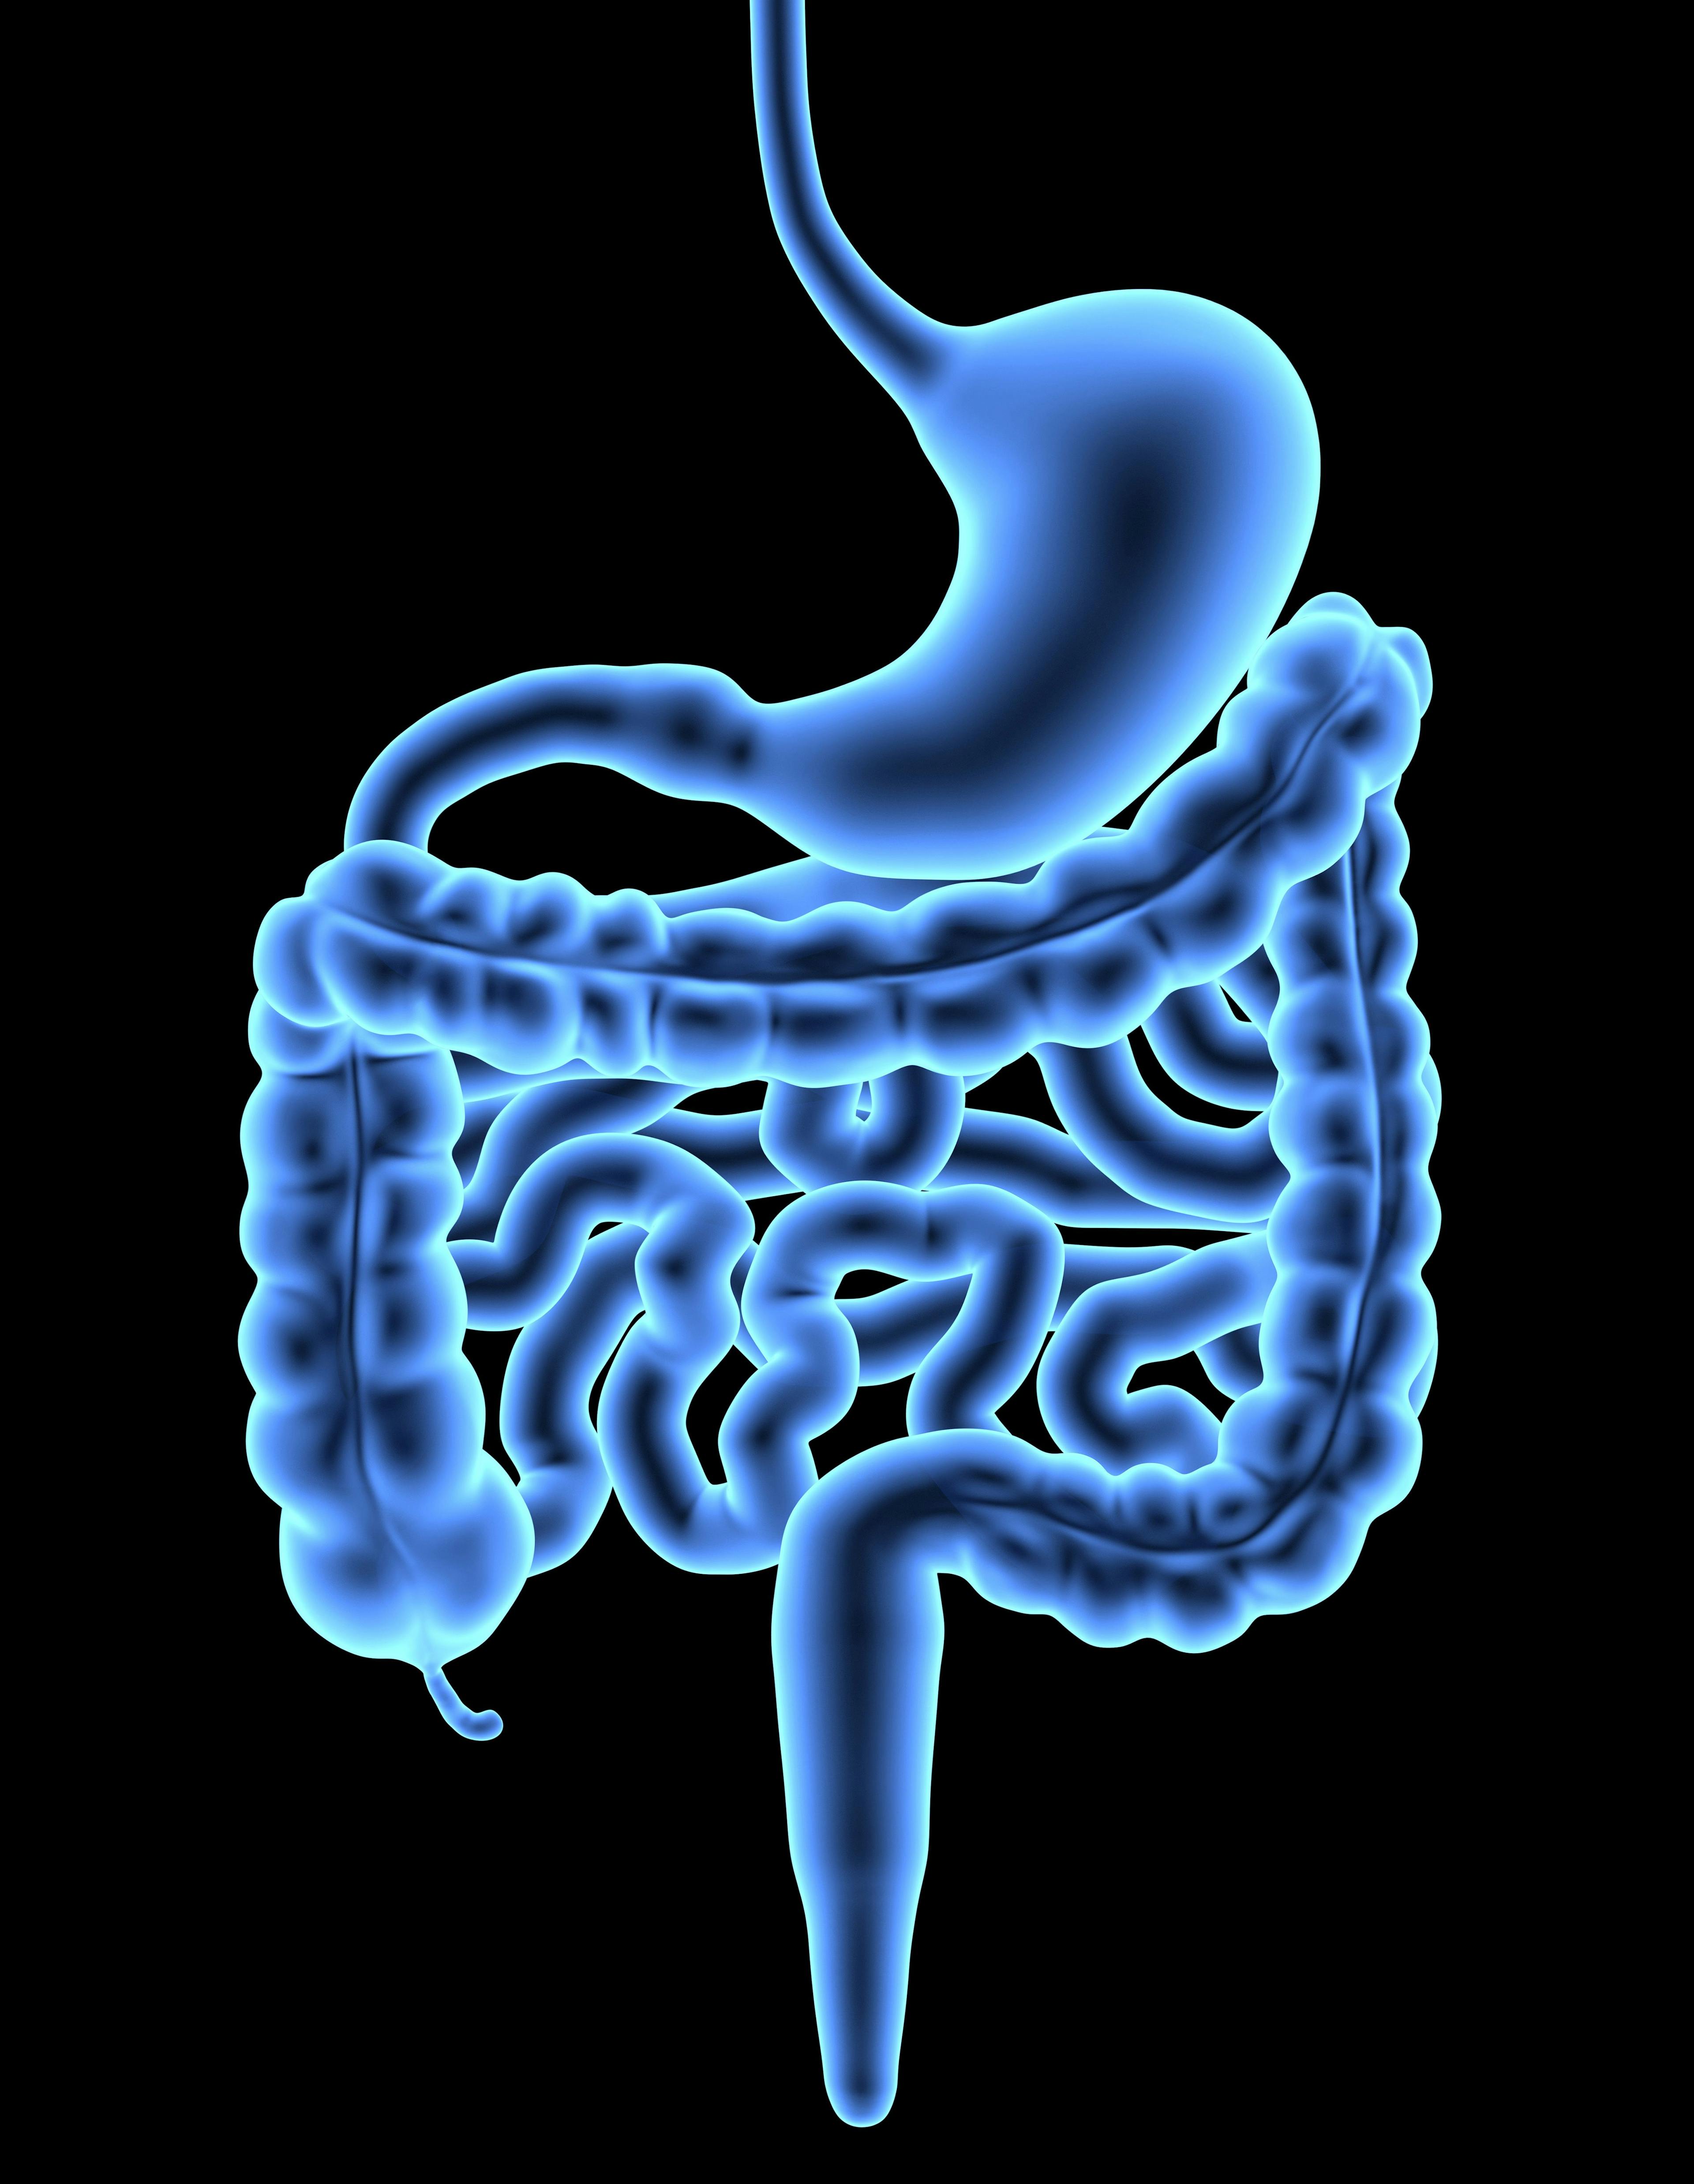 Early-Onset Colorectal Study Shows Better Overall Survival for Patients Under 50